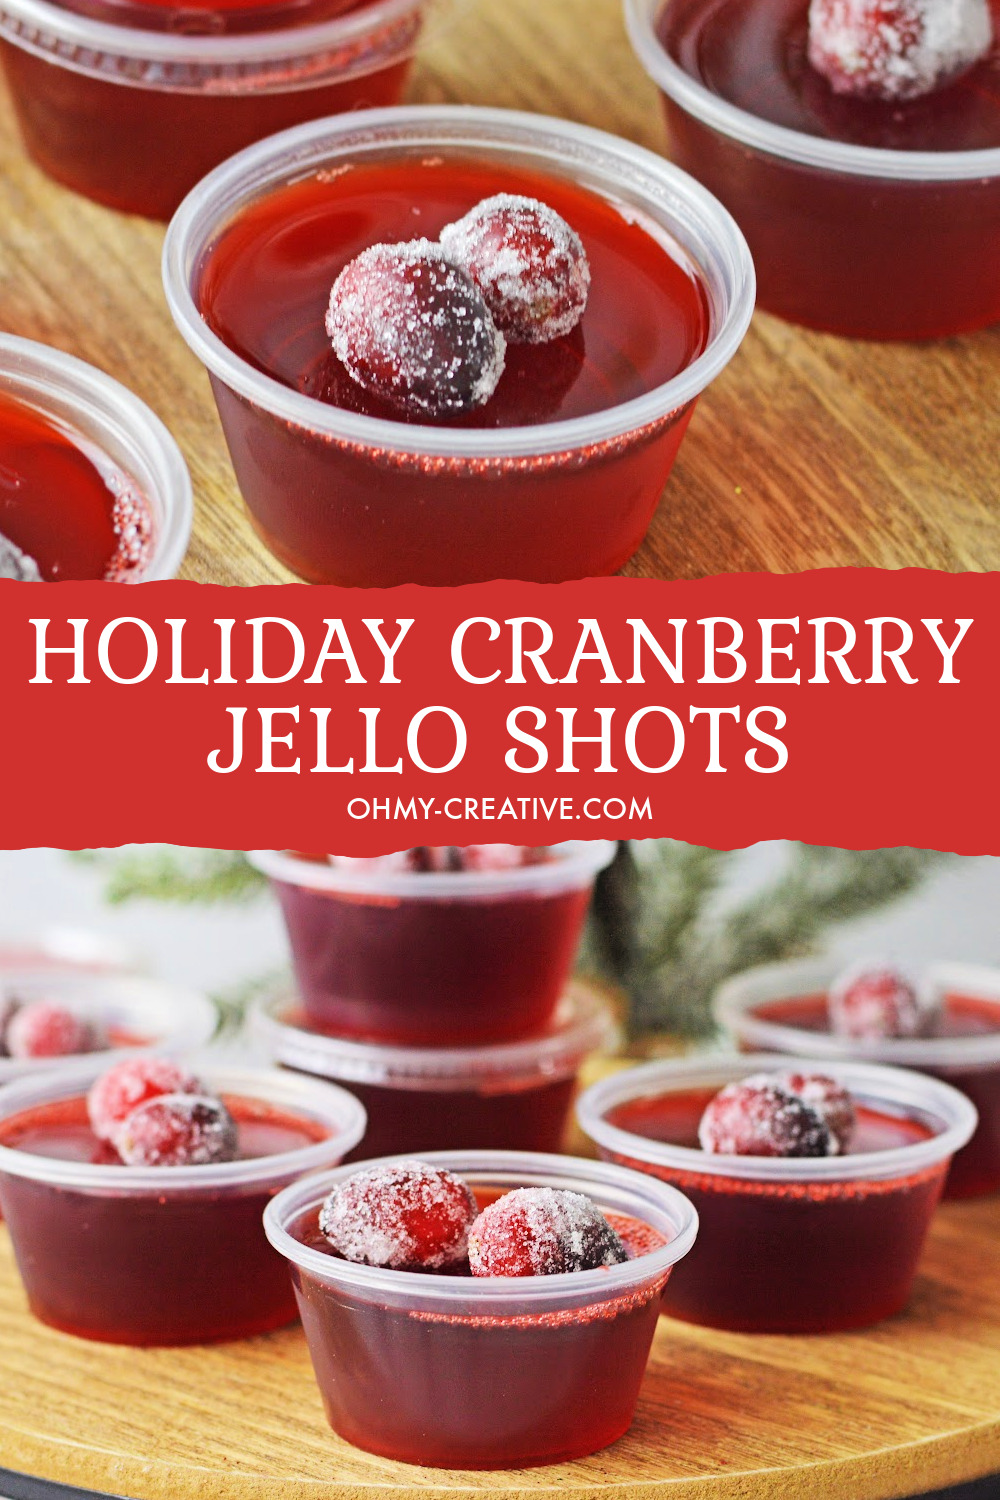 Serve up this tasty cranberry jello shots for the holidays! These Christmas jello shots are sitting on a wood tray with Christmas greenery in the background.